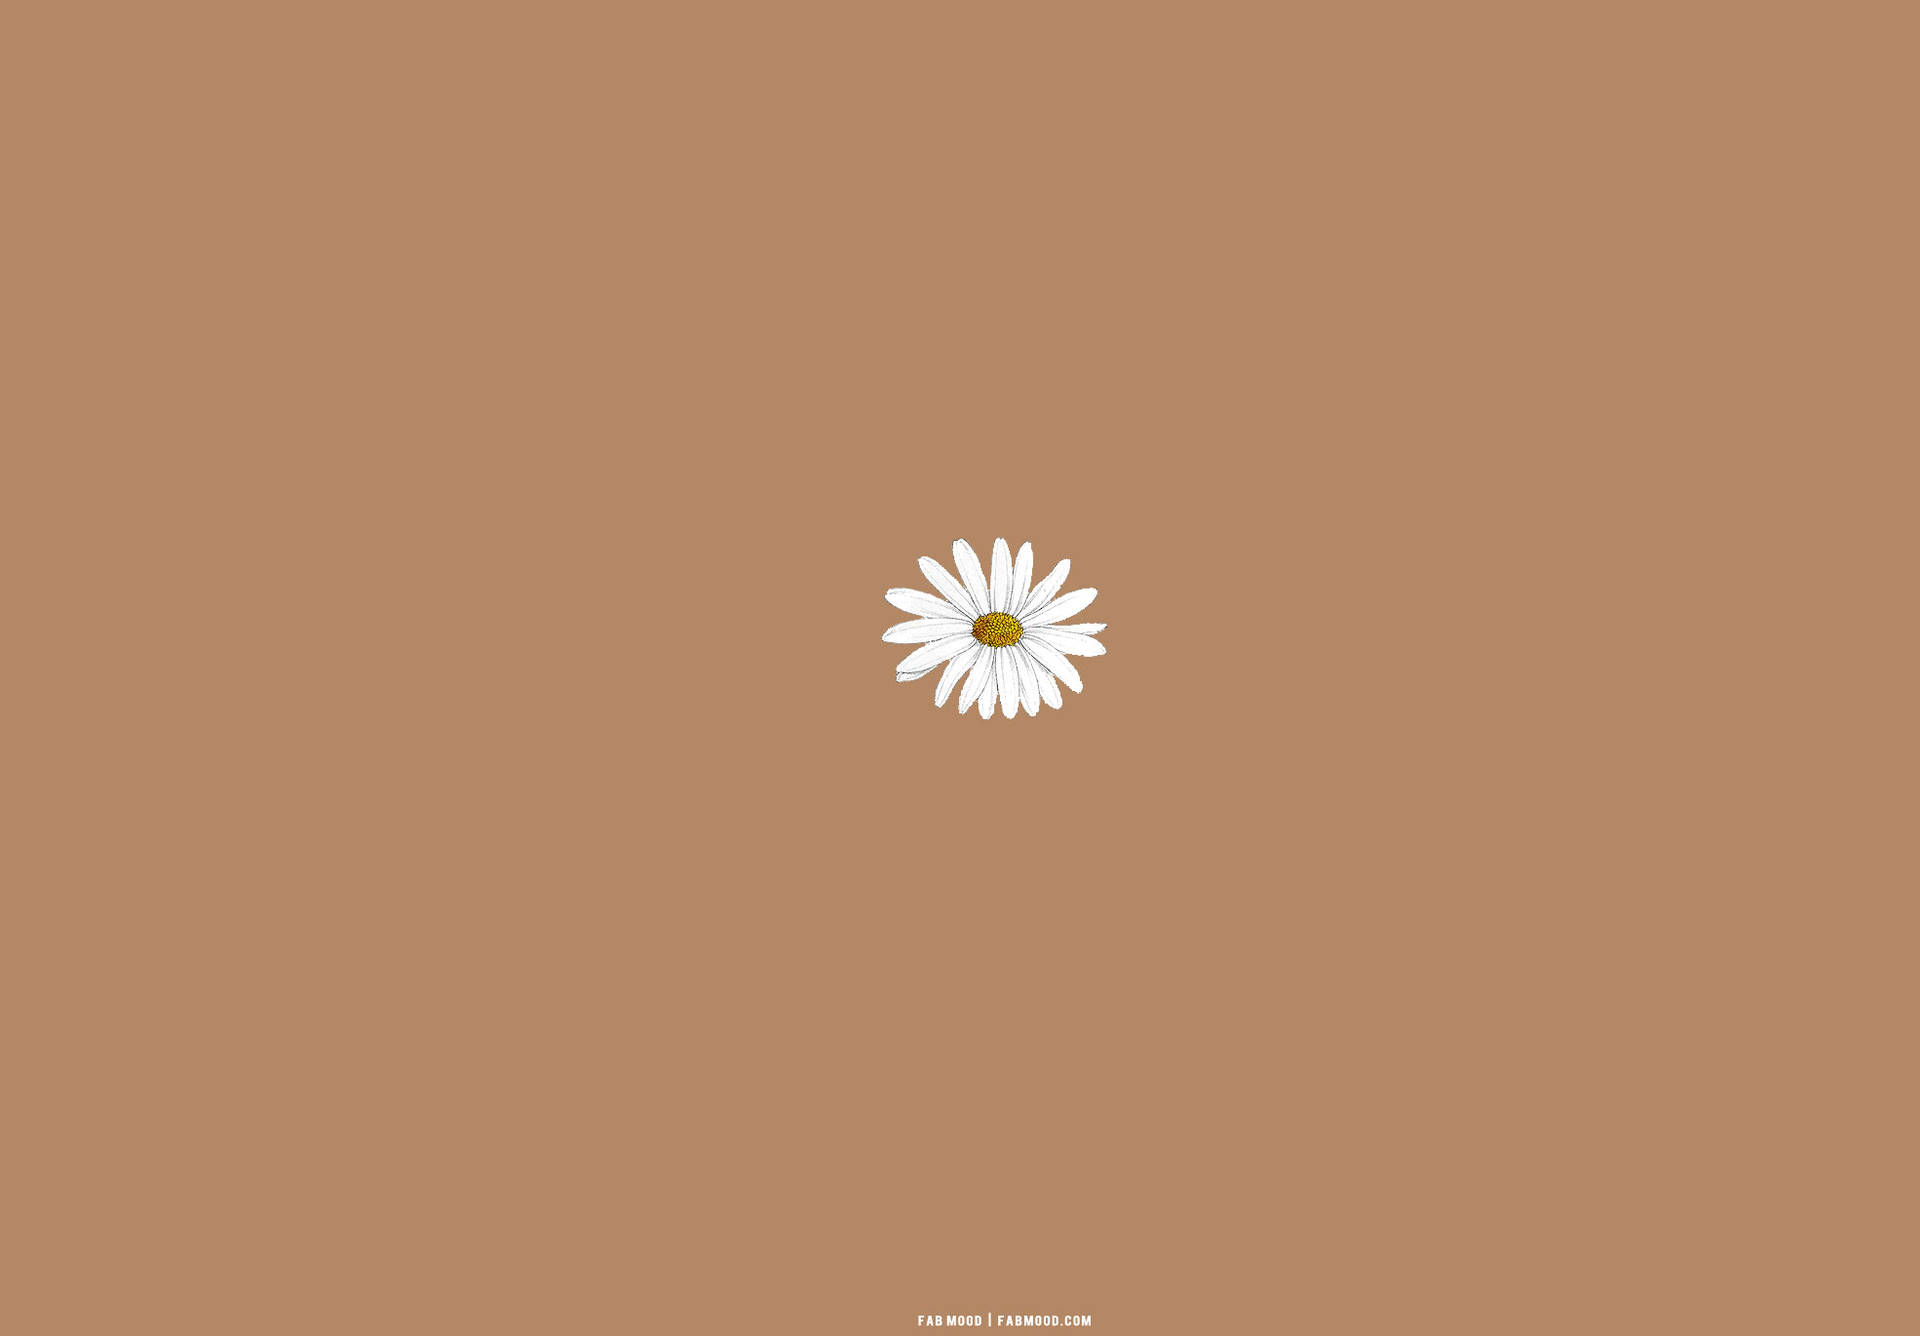 White Daisy On Beige Brown Aesthetic Background